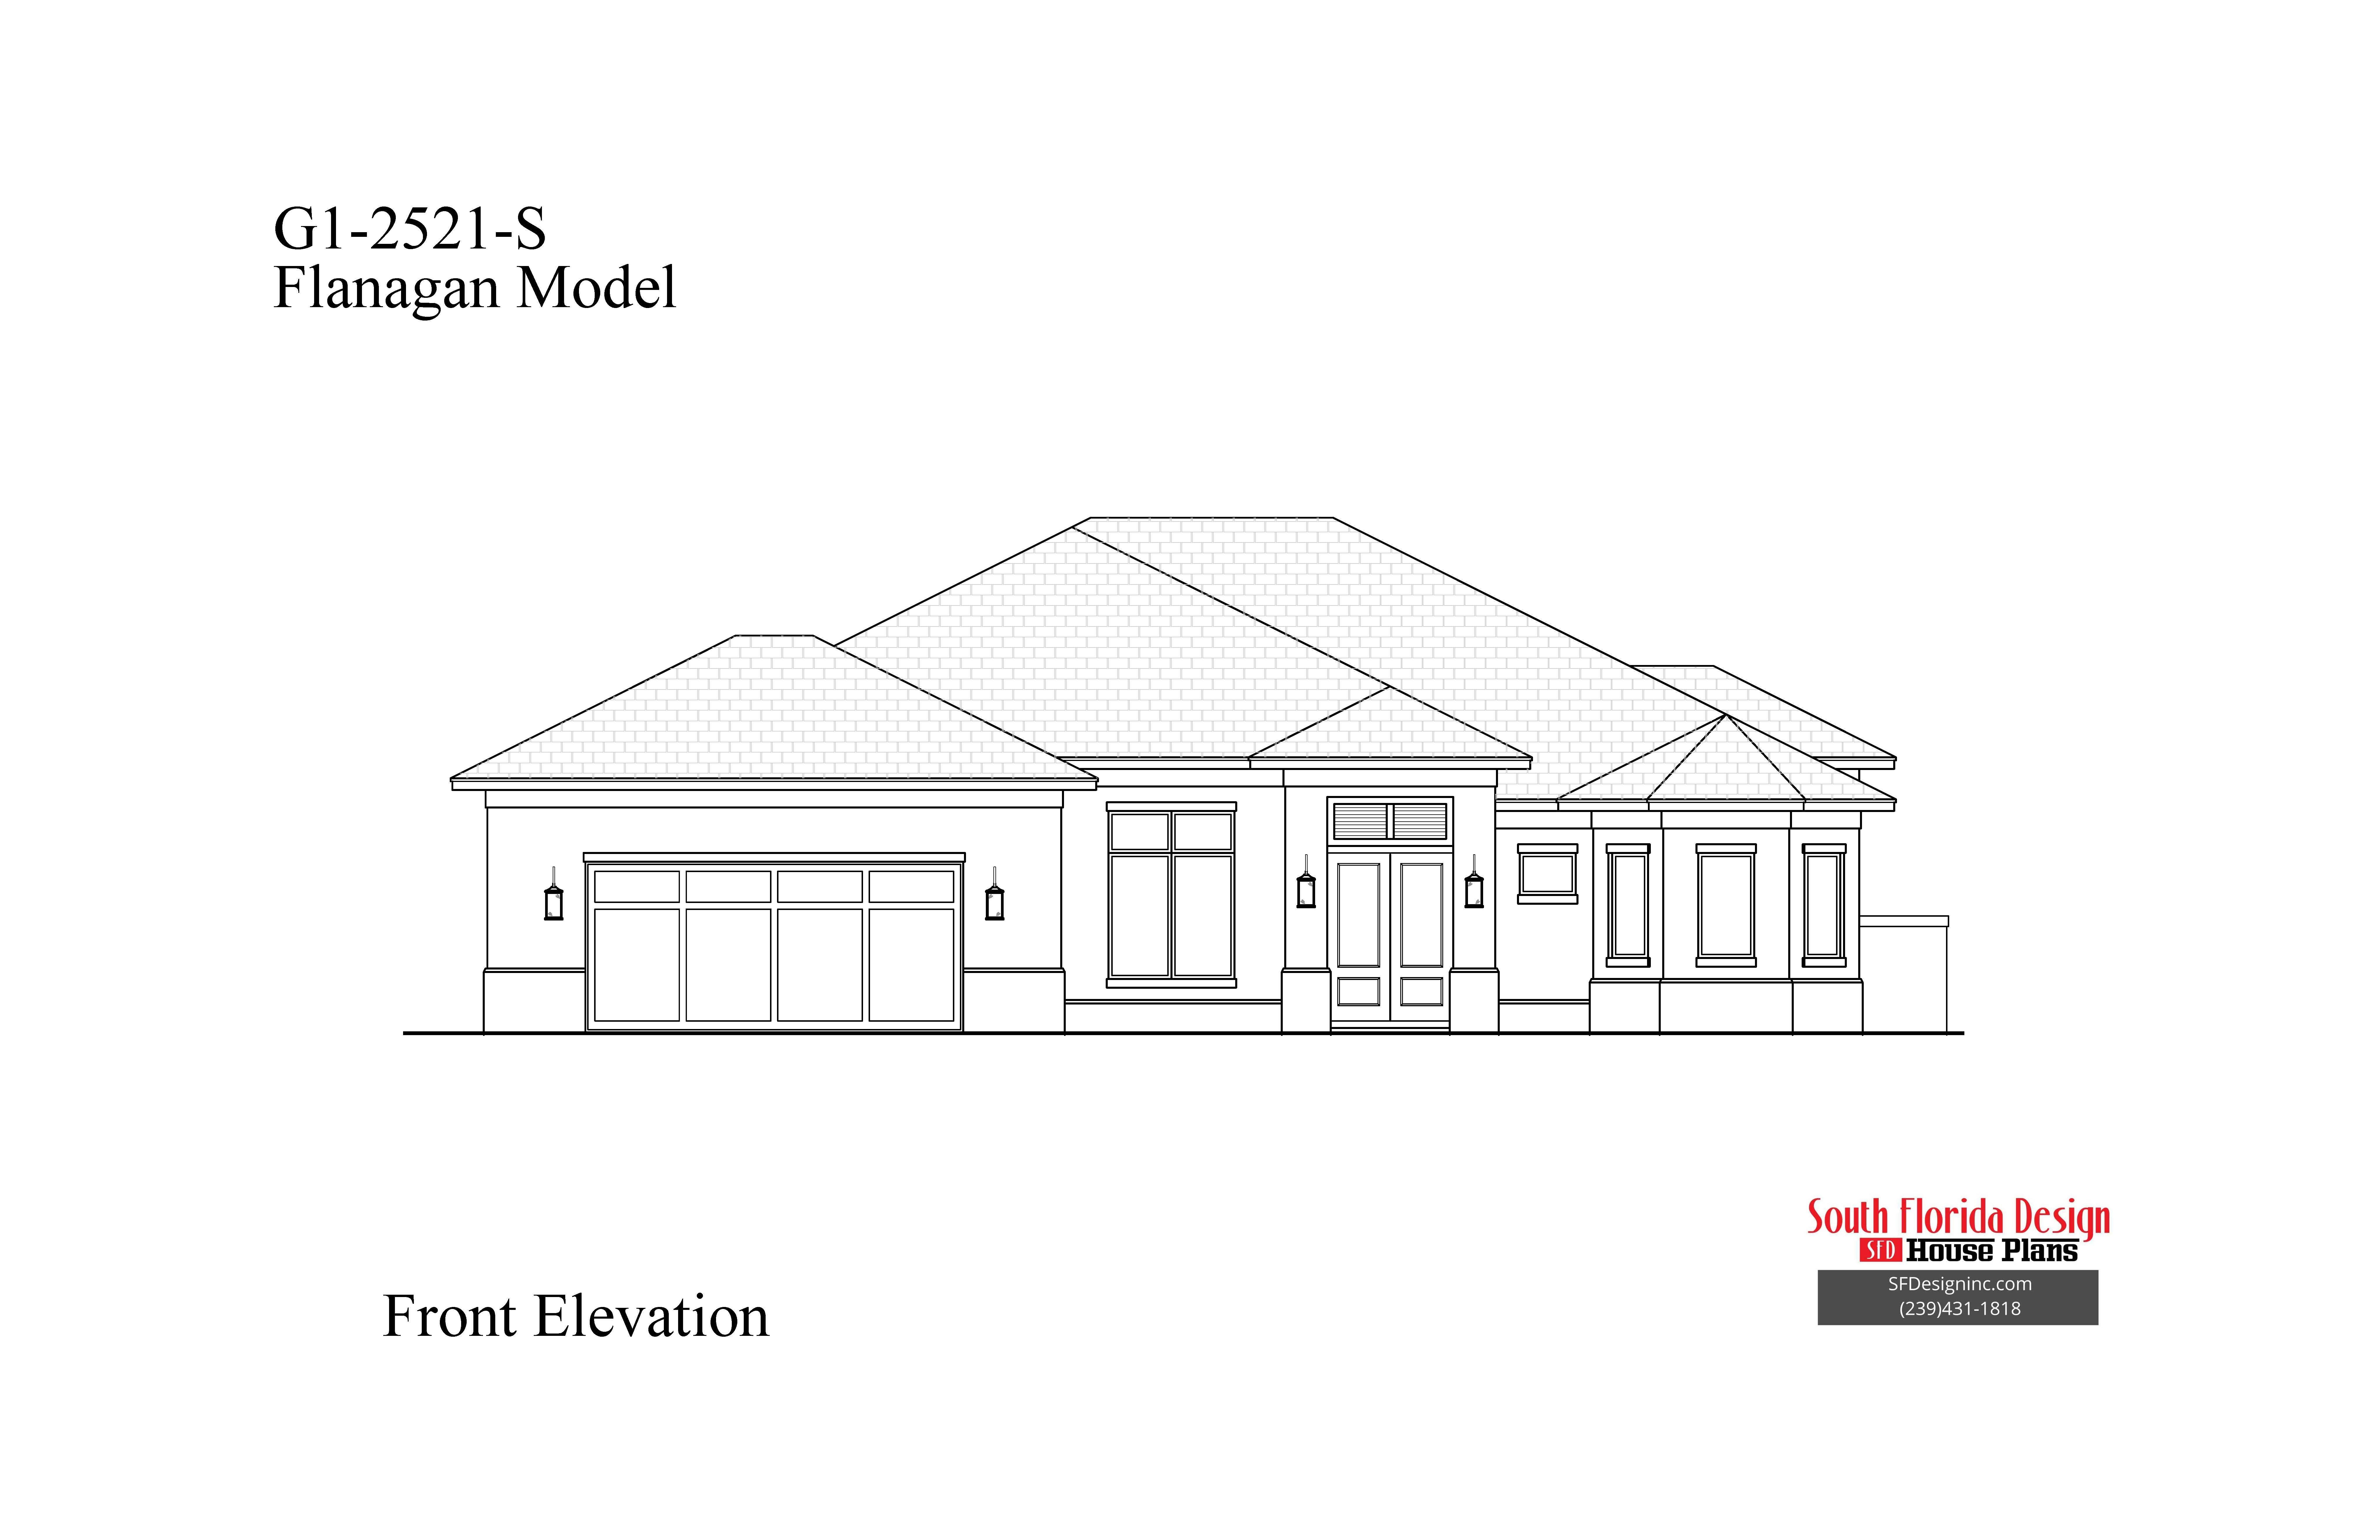 Black and white front elevation sketch of a 1-story 2521sf house plan